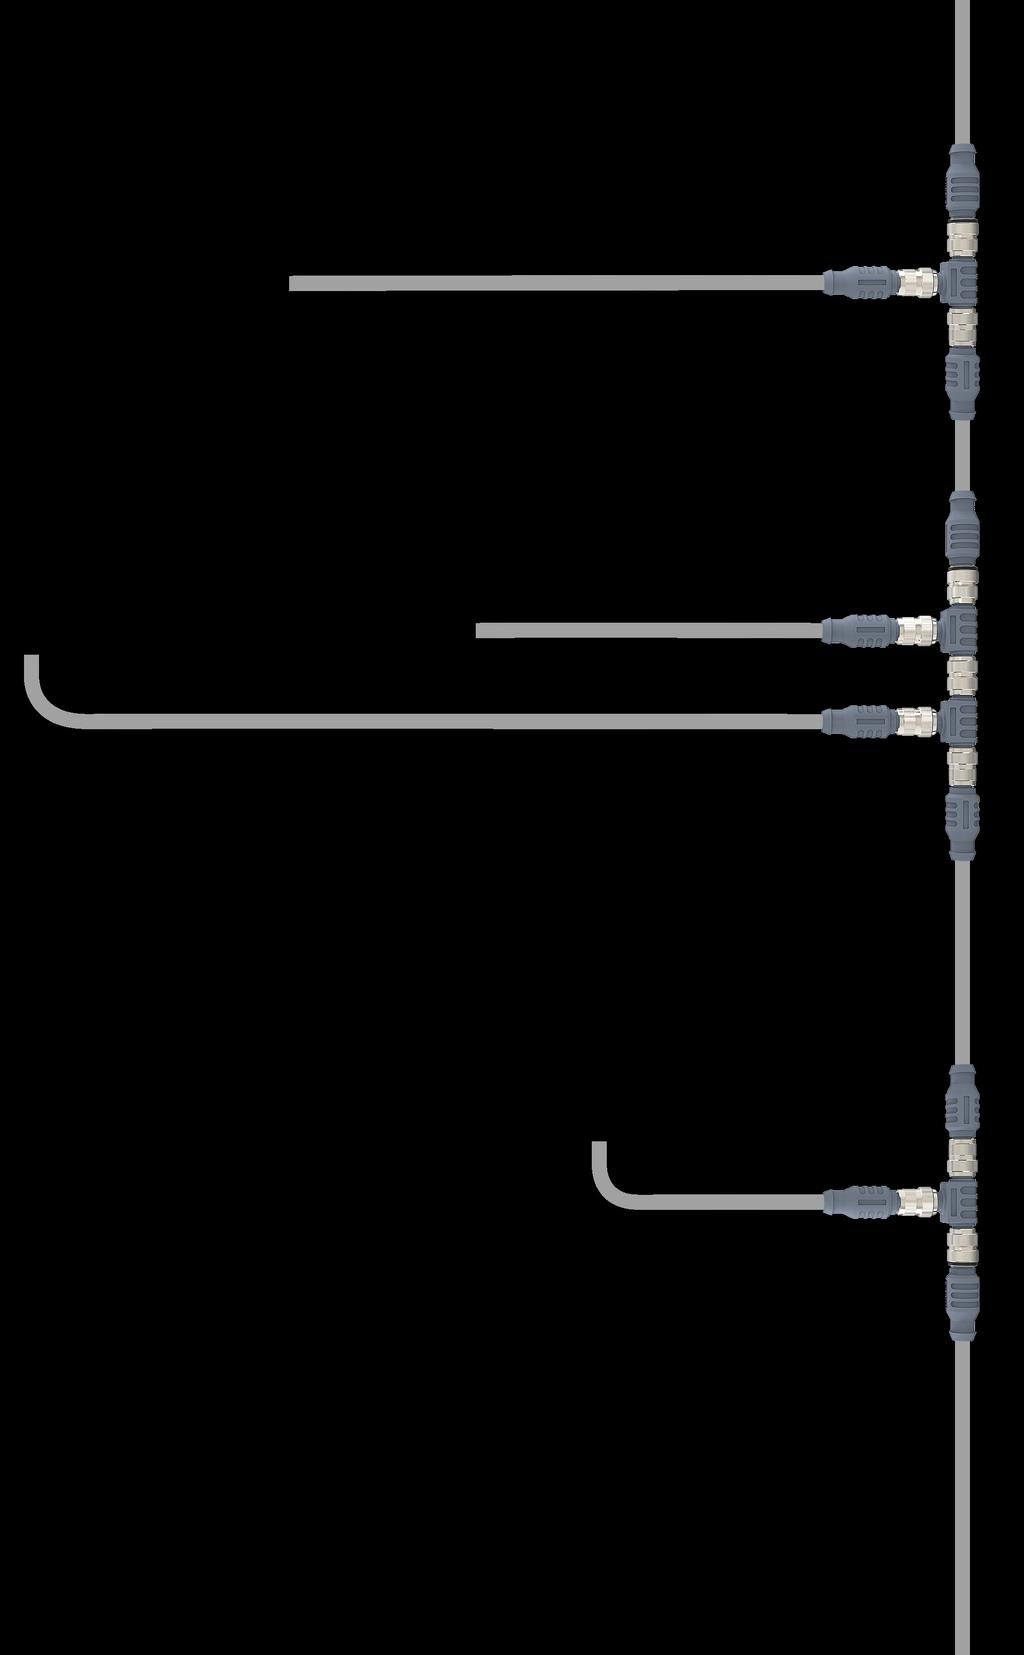 the load cable from the CLM-Series